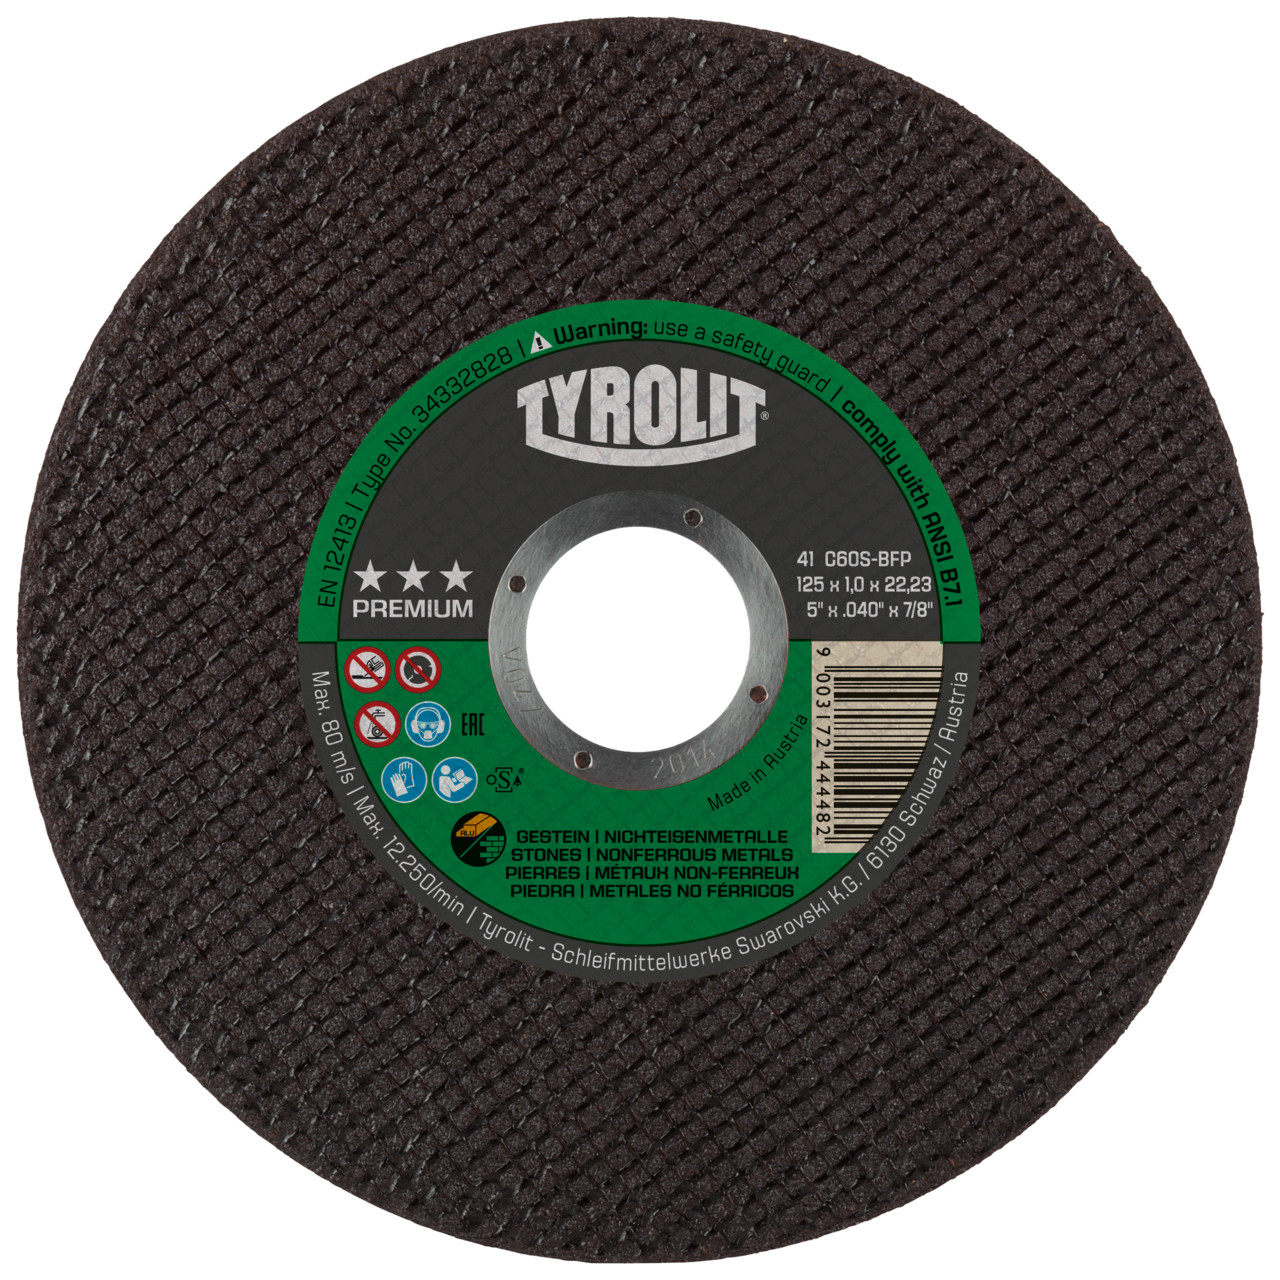 TYROLIT cut-off wheels DxDxH 125x1.0x22.23 For non-ferrous metals and stone, shape: 41 - straight version, Art. 34332828